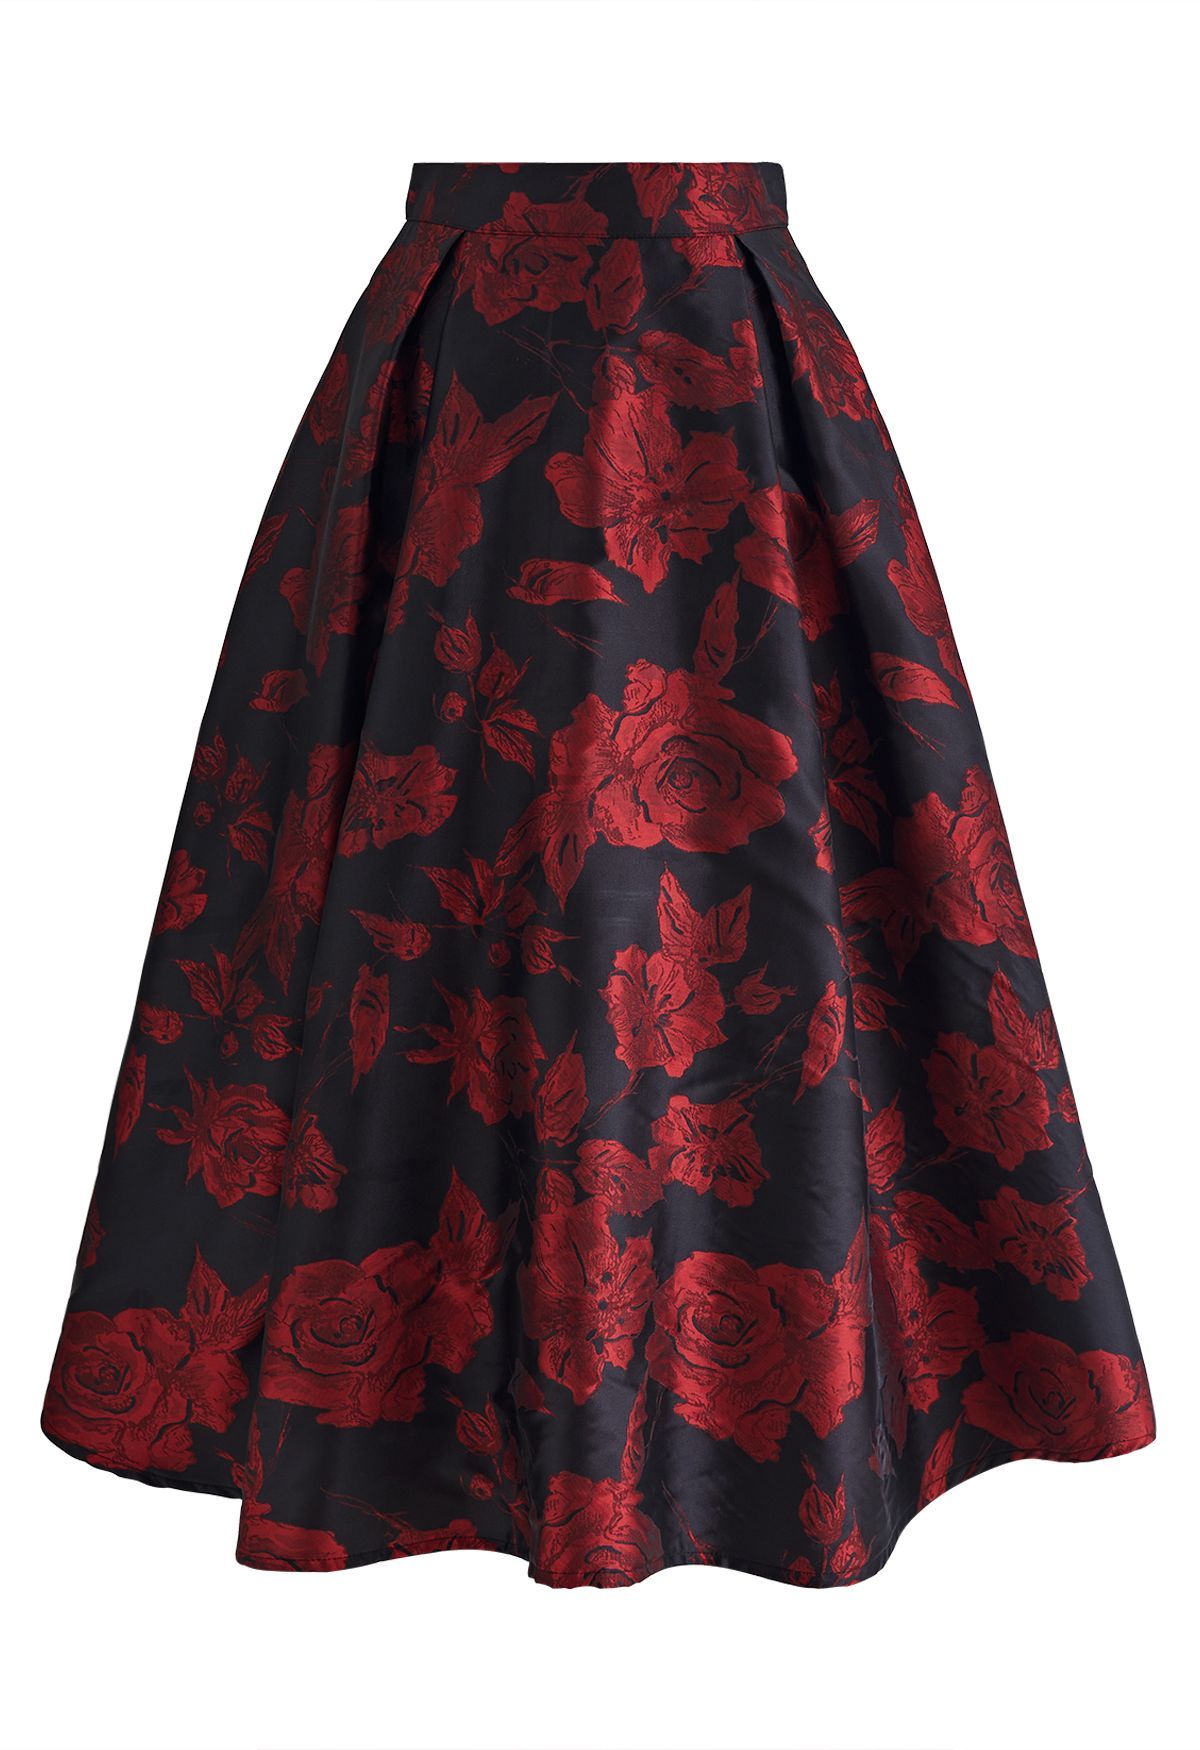 Mysterious Red Rose Jacquard A-Line Skirt | Chicwish